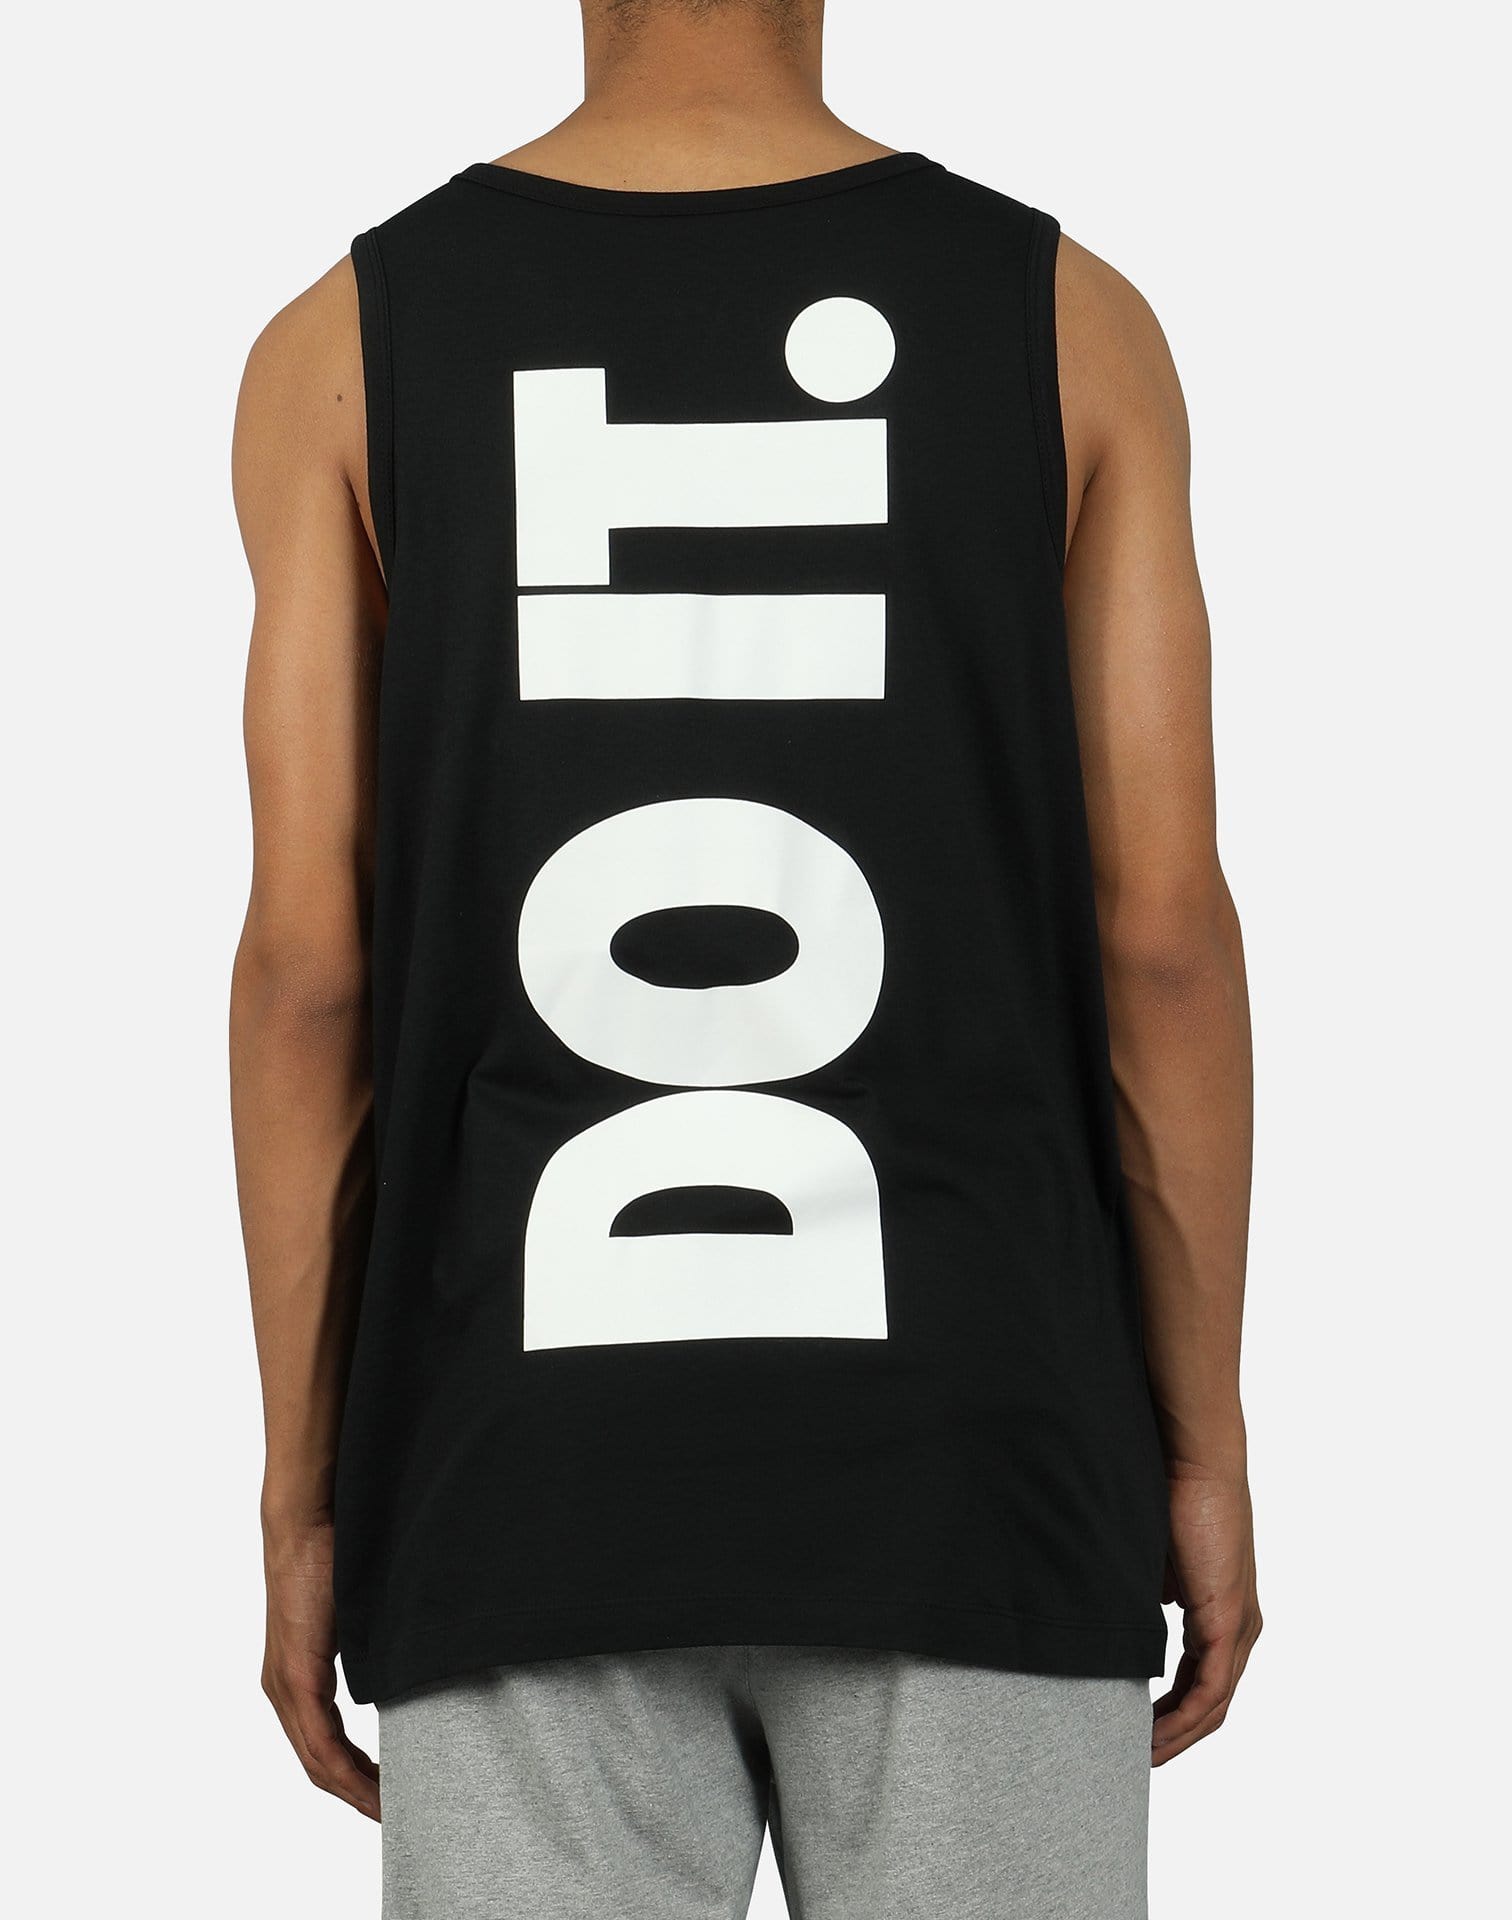 NSW HBR JUST DO IT TANK TOP – DTLR